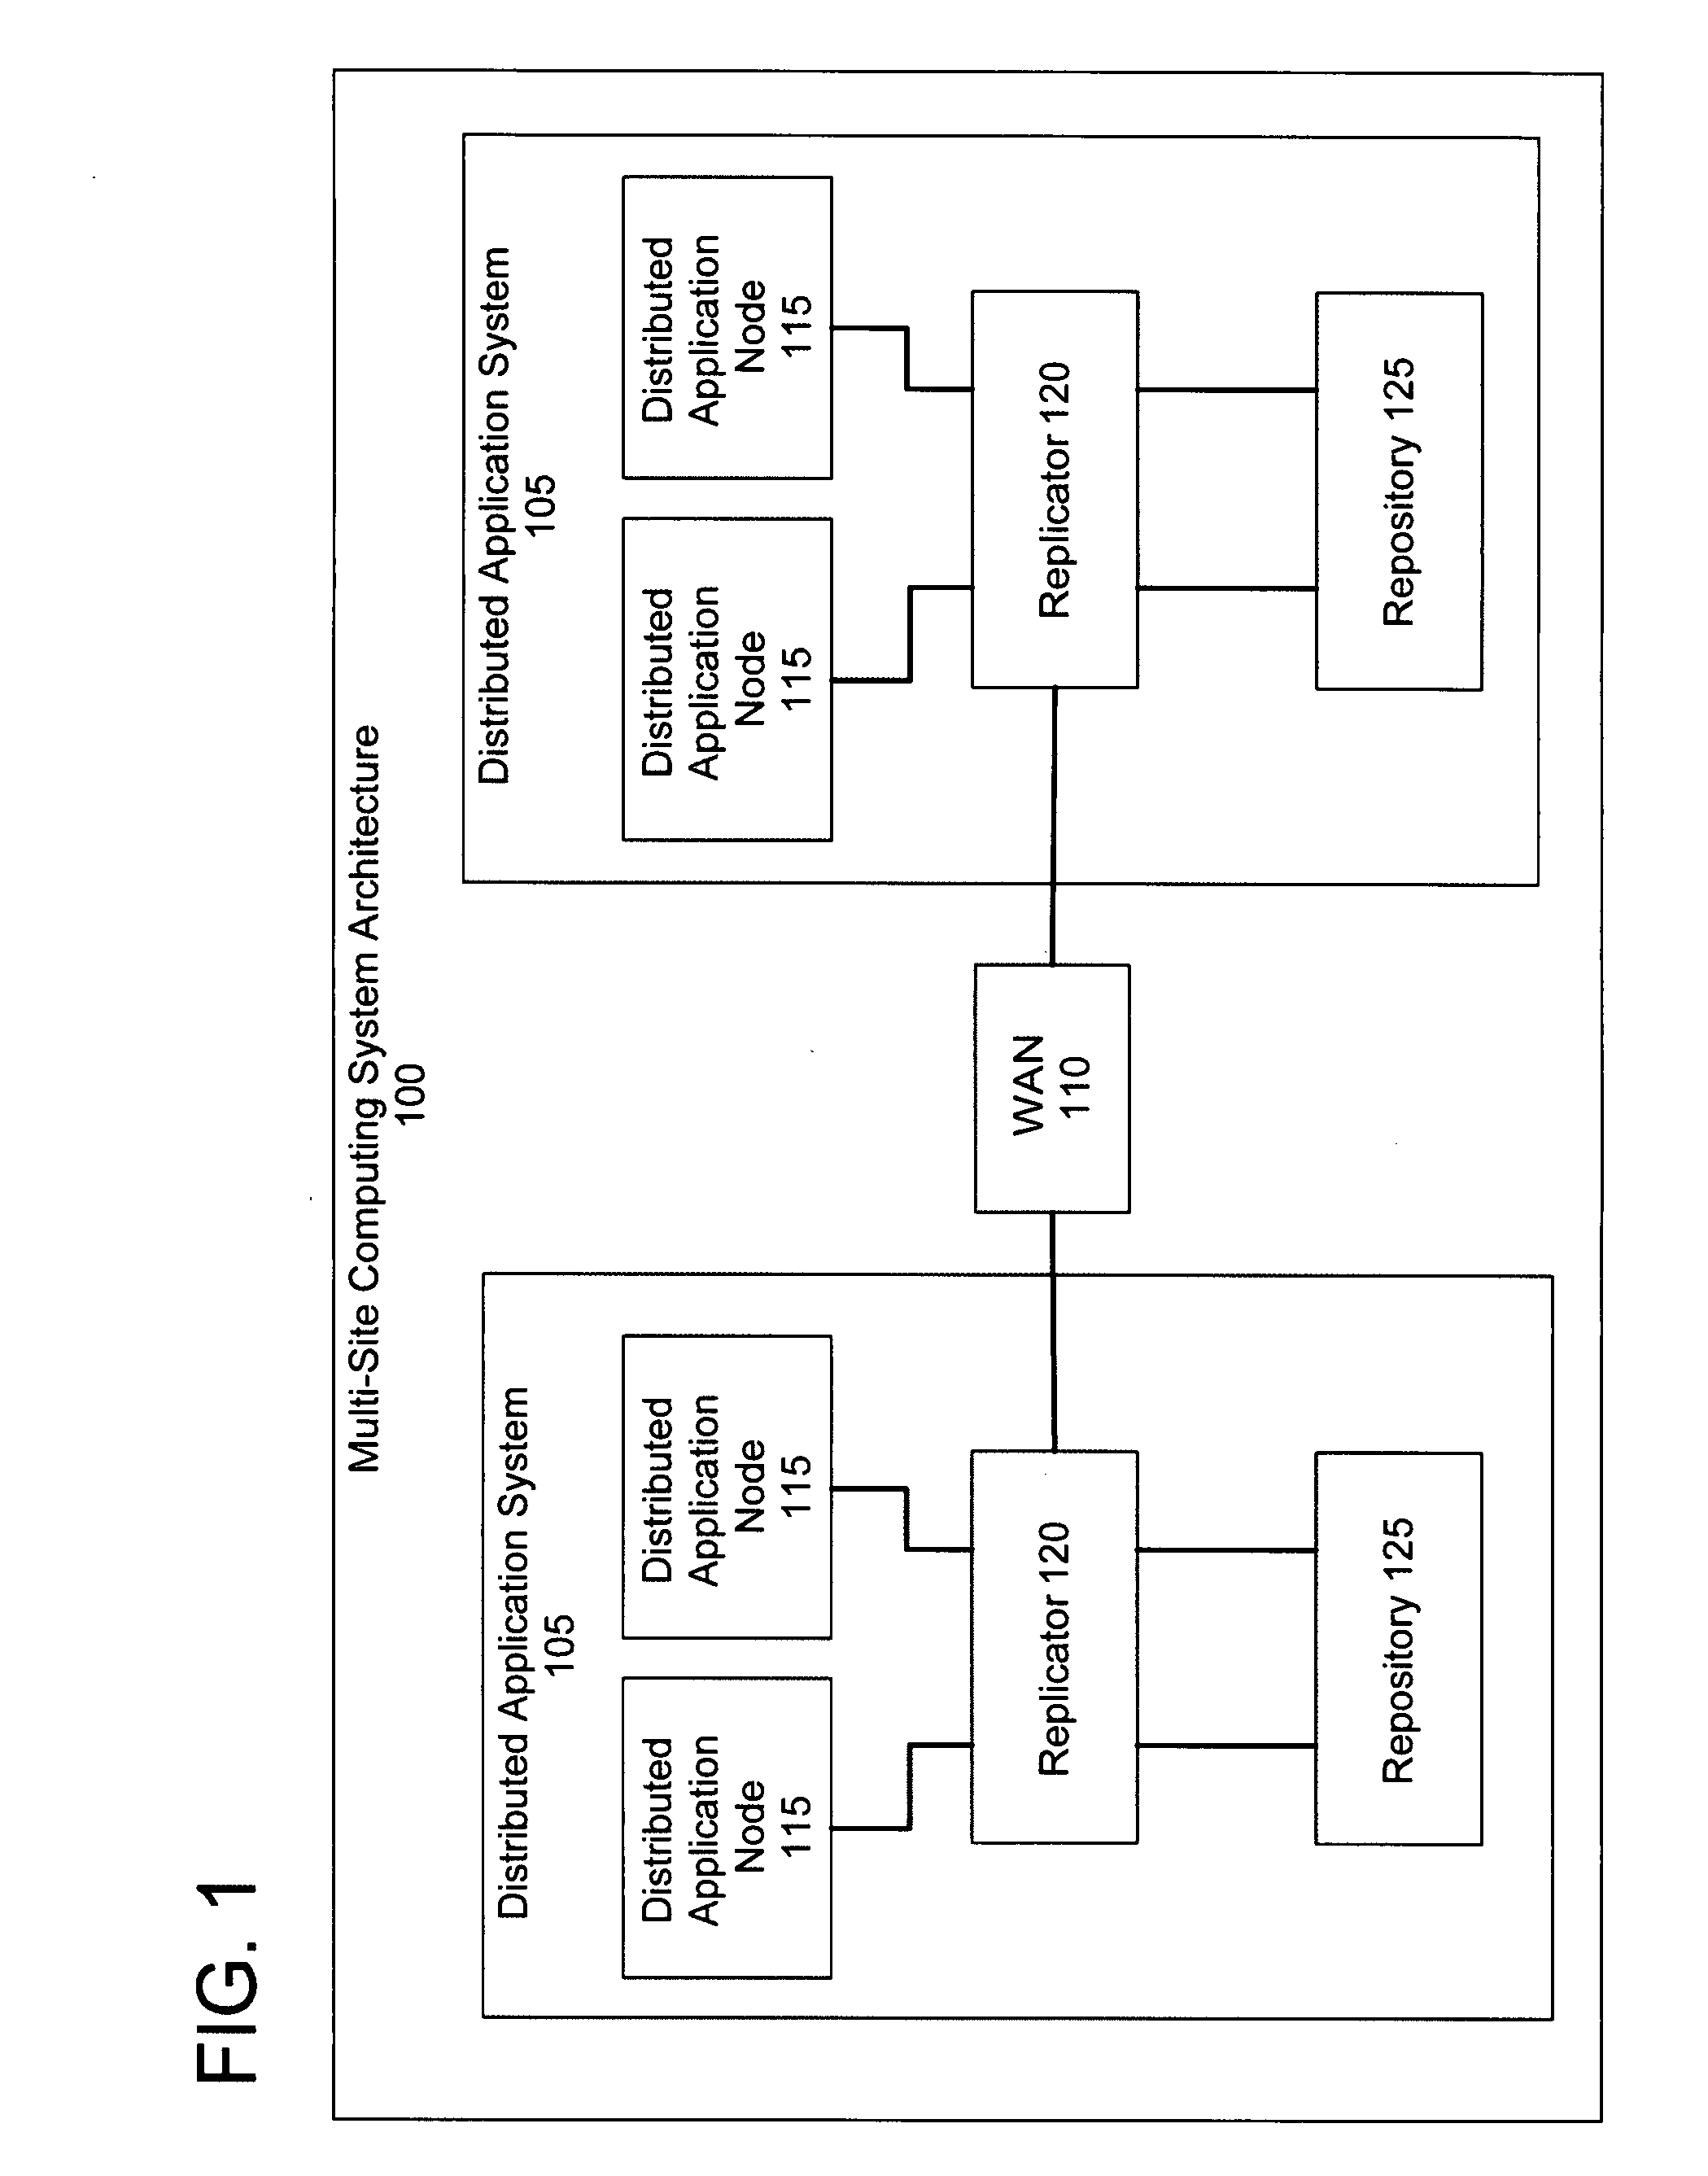 Method for managing proposals in a distributed computing system